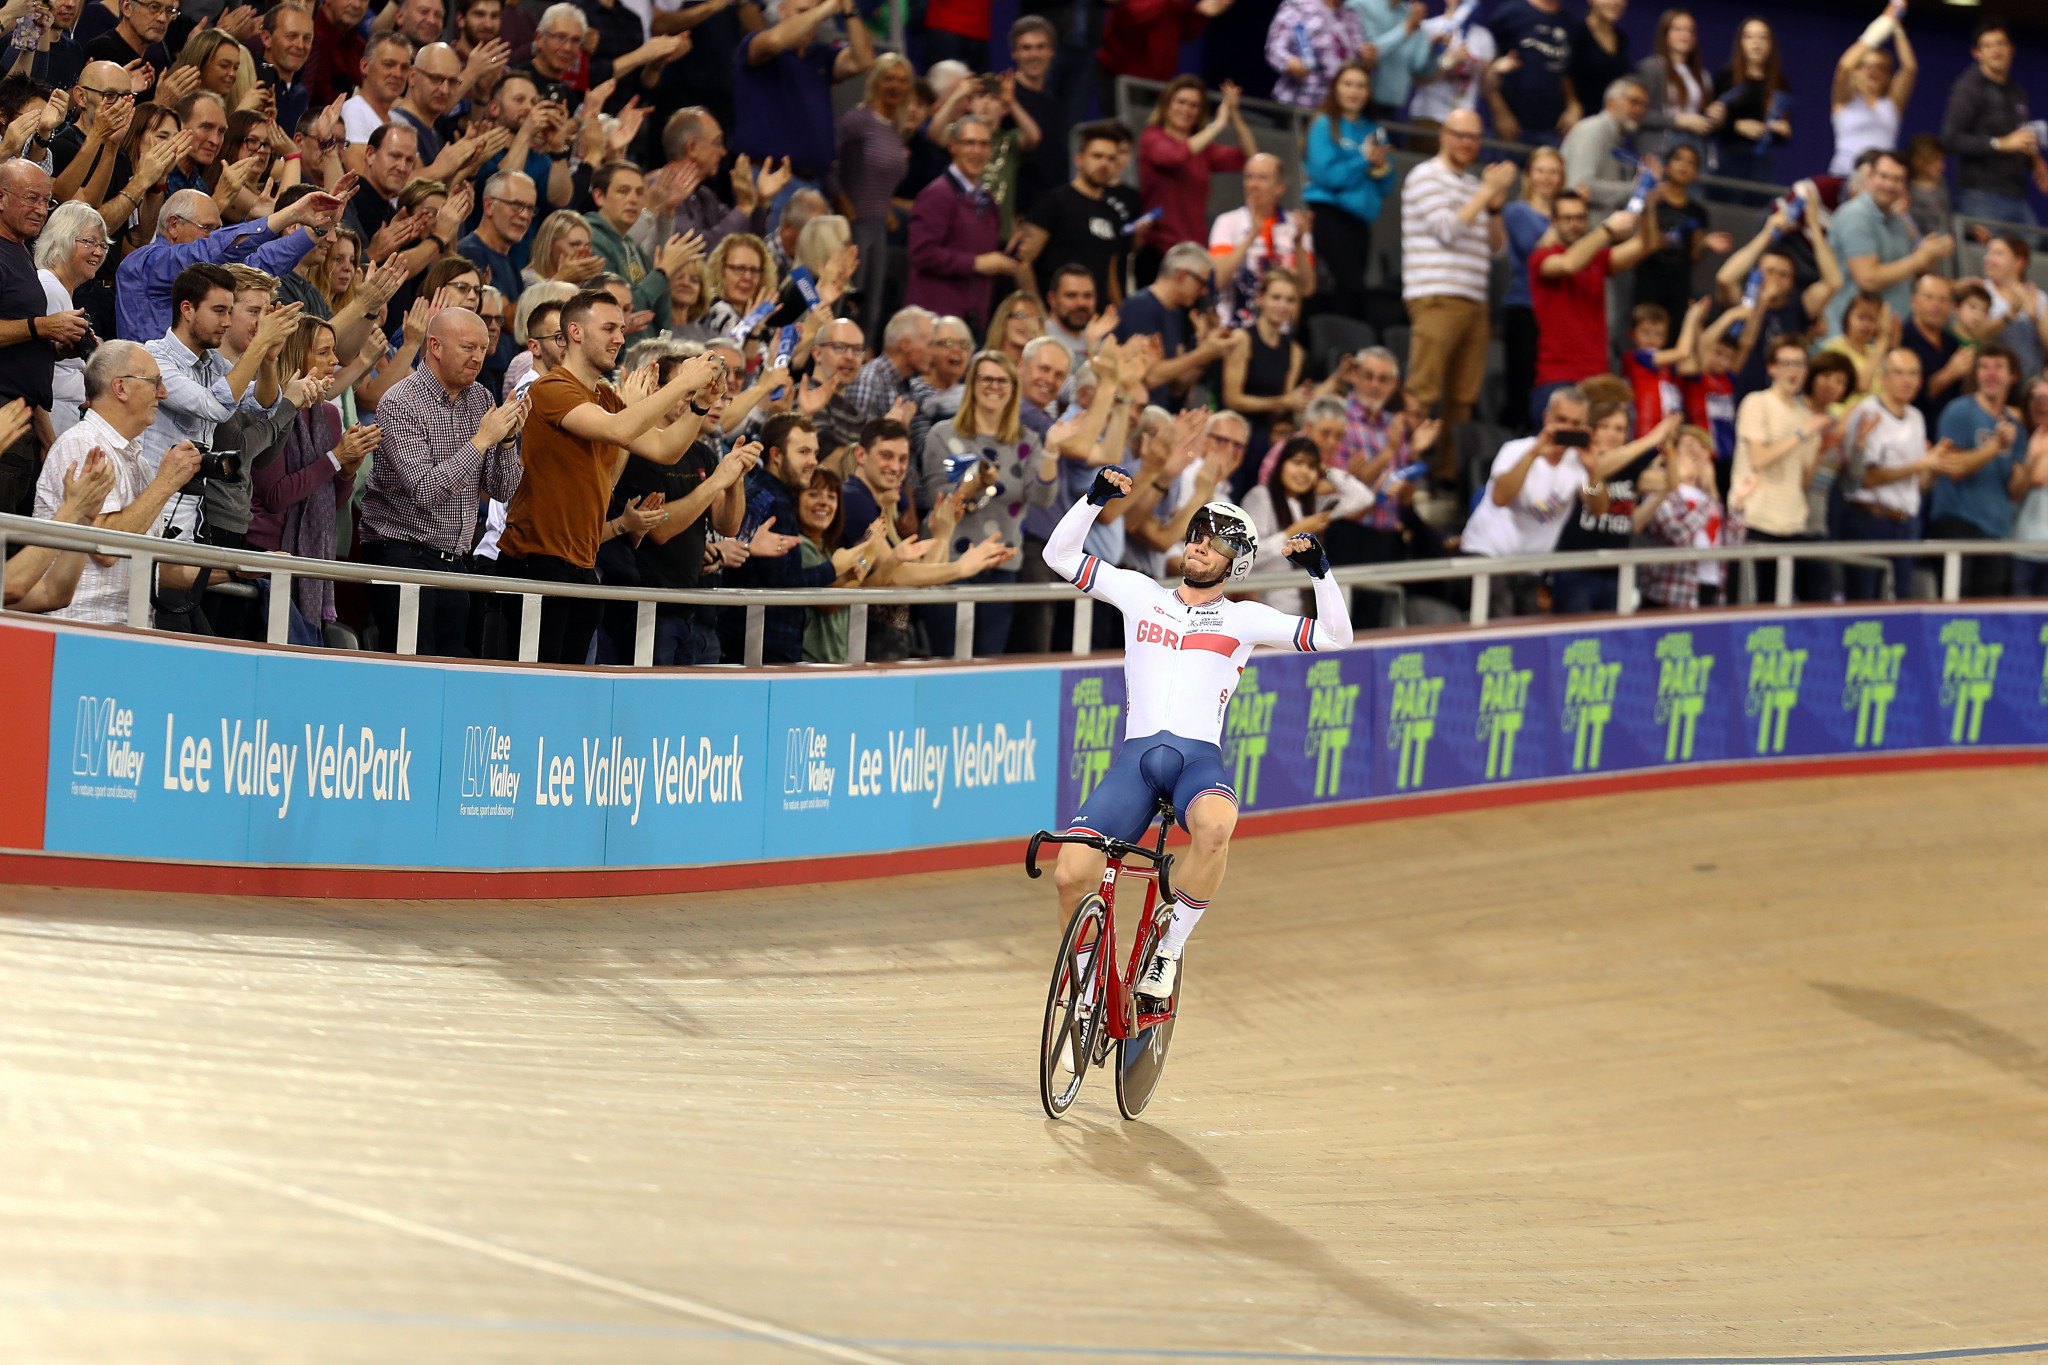 Matthew Walls won the men's omnium as competition drew to a close at the UCI Track World Cup in London ©Getty Images